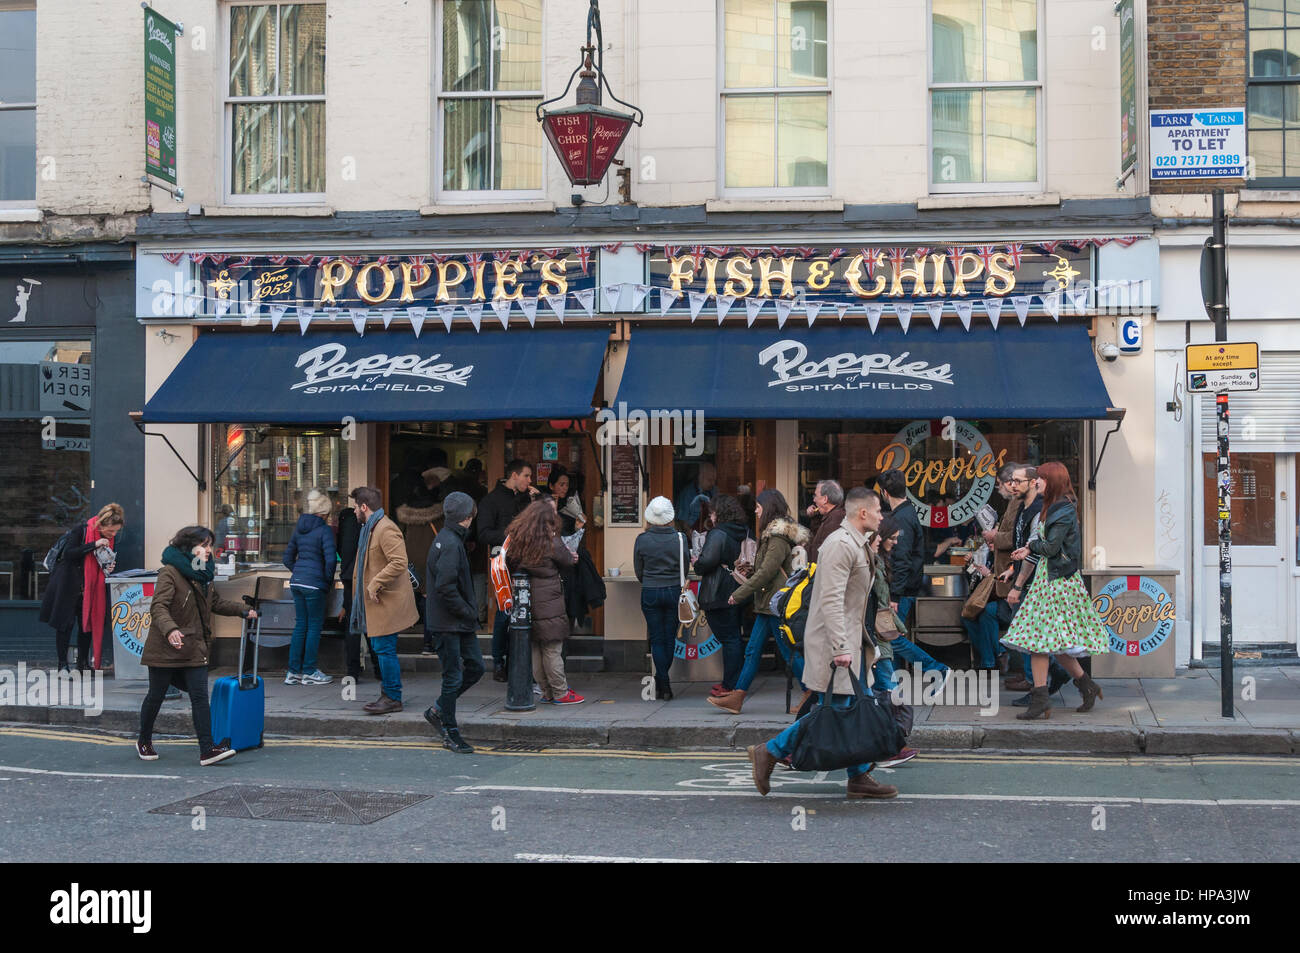 A busy street scene with customers and passers-by outside Poppies fish and chip shop, Hanbury Street, London E1. Stock Photo